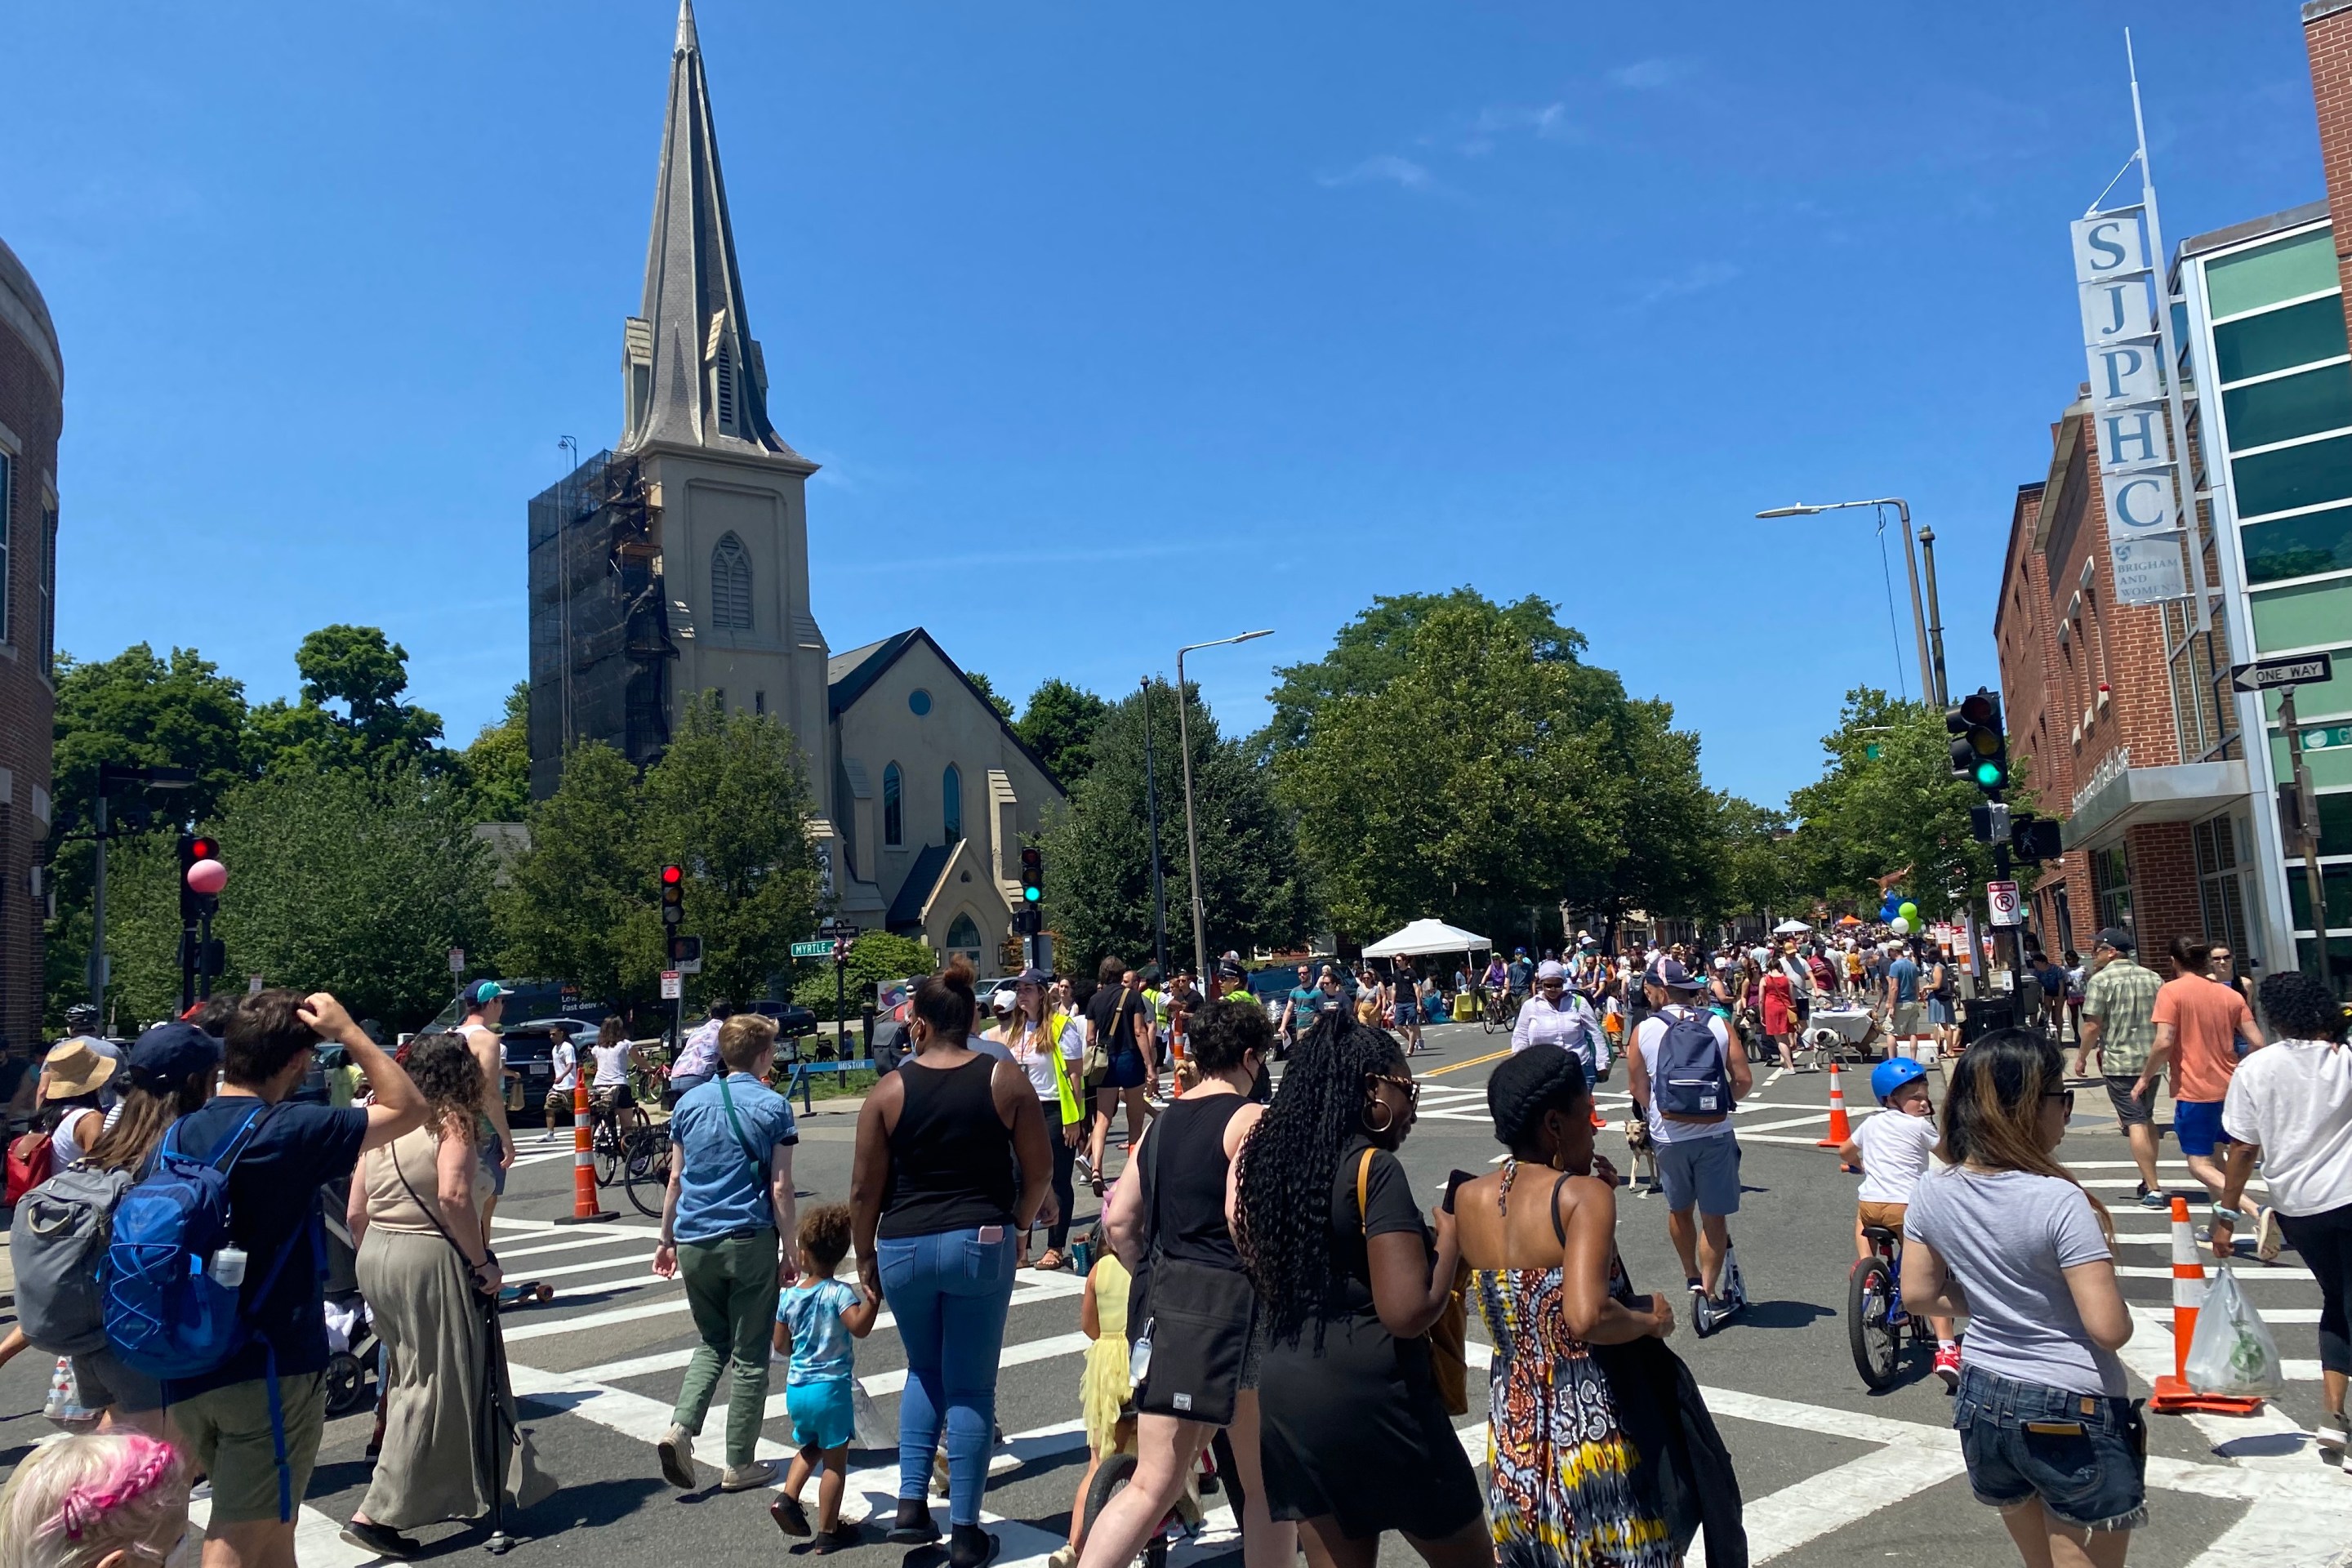 A large crowd of people walking and biking fills an intersection in front of a large church steeple.